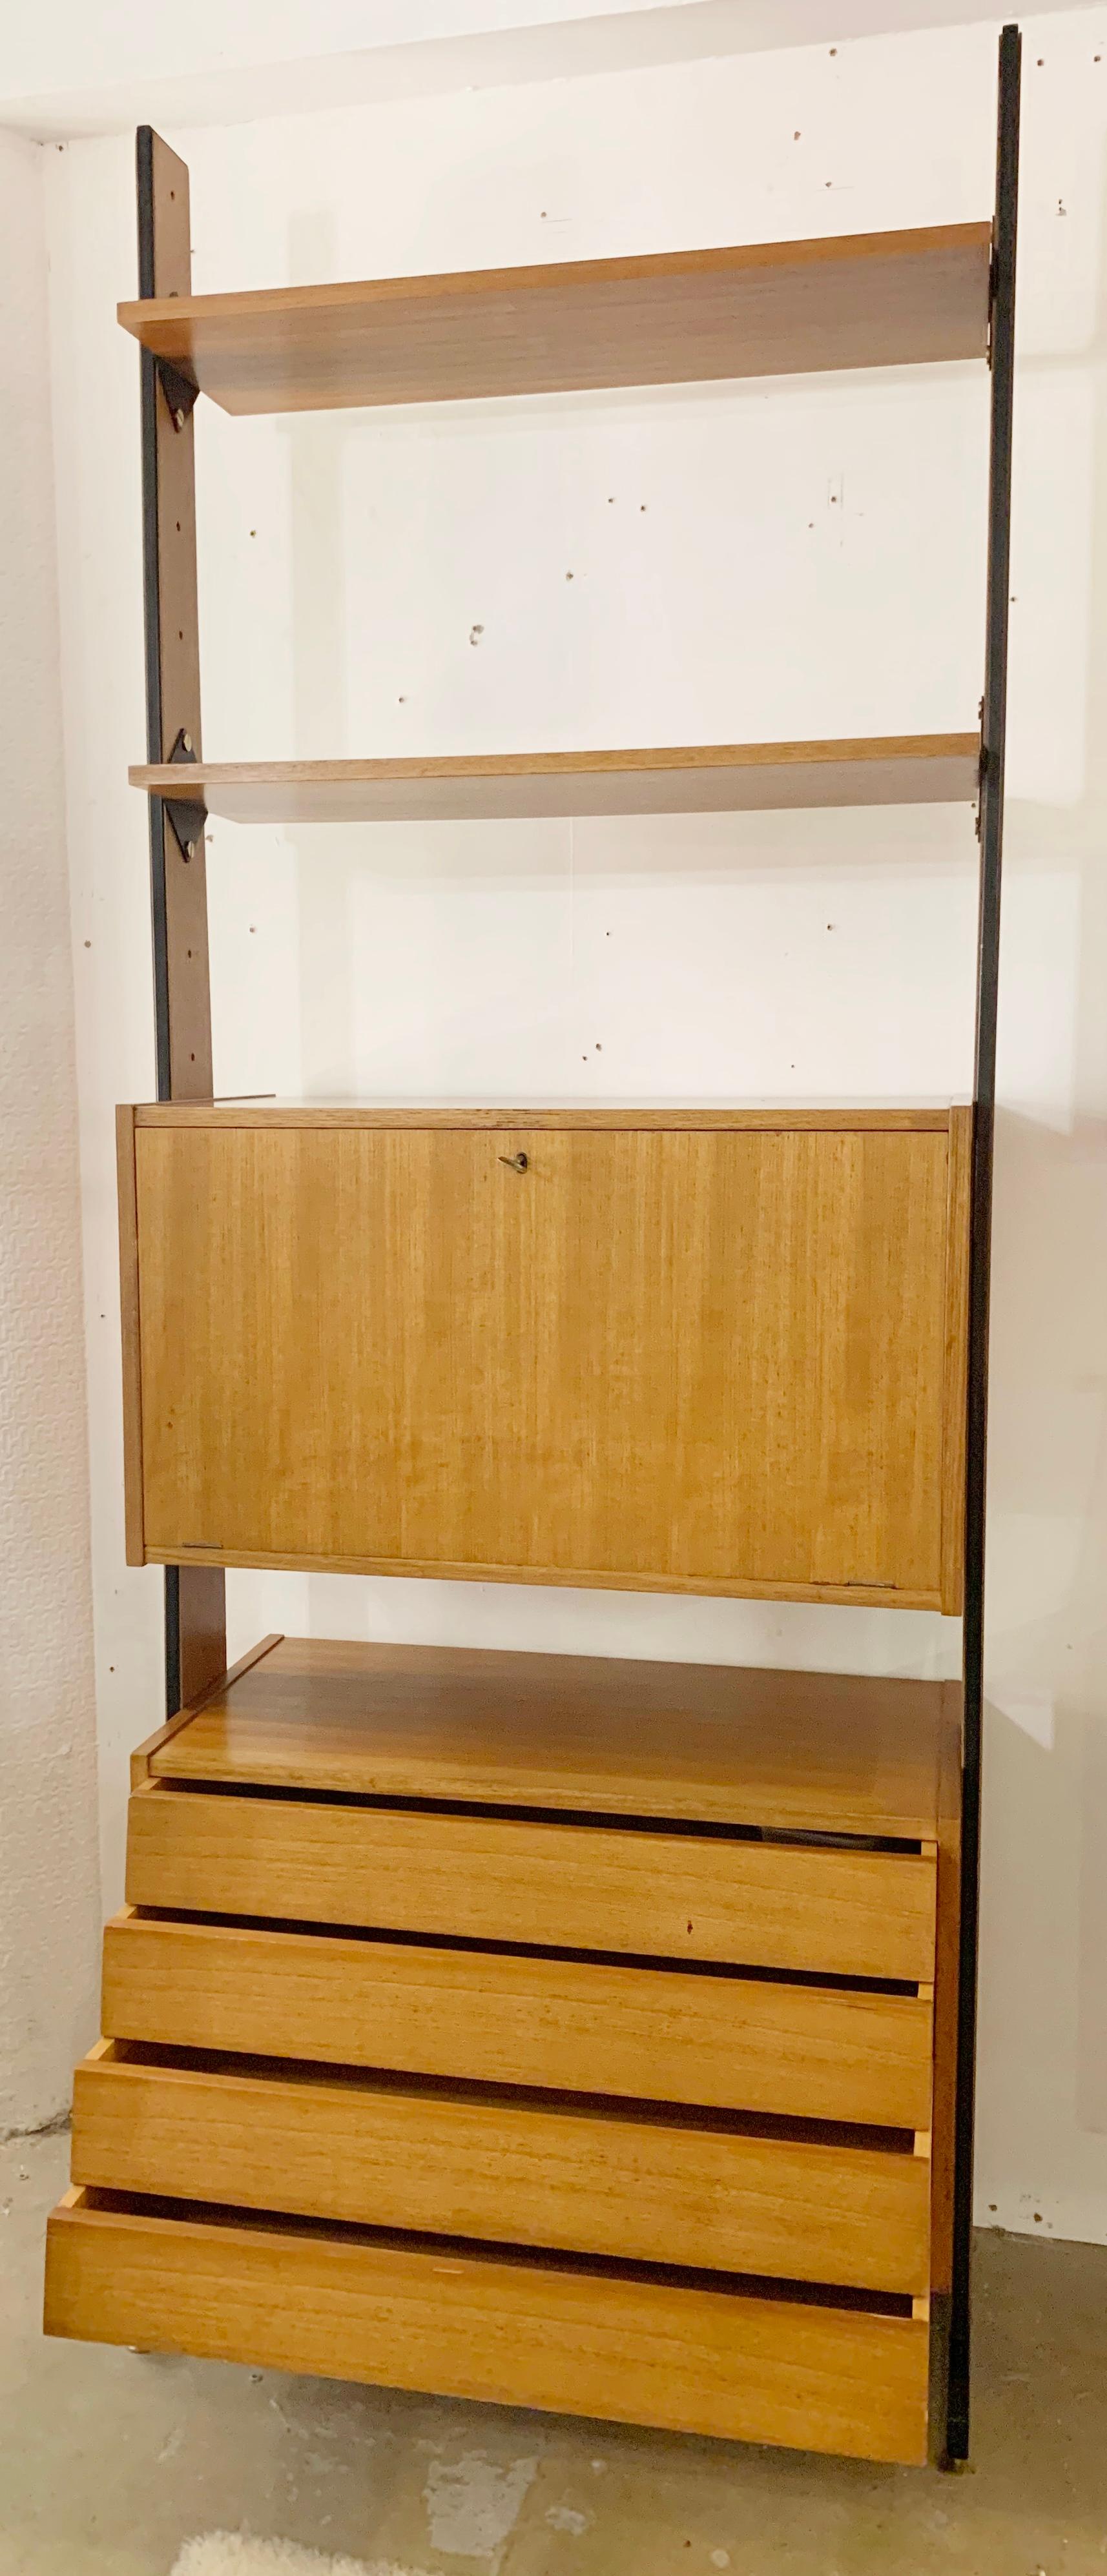 Mid-century wooden drawers wall unit - Italy 1960s.